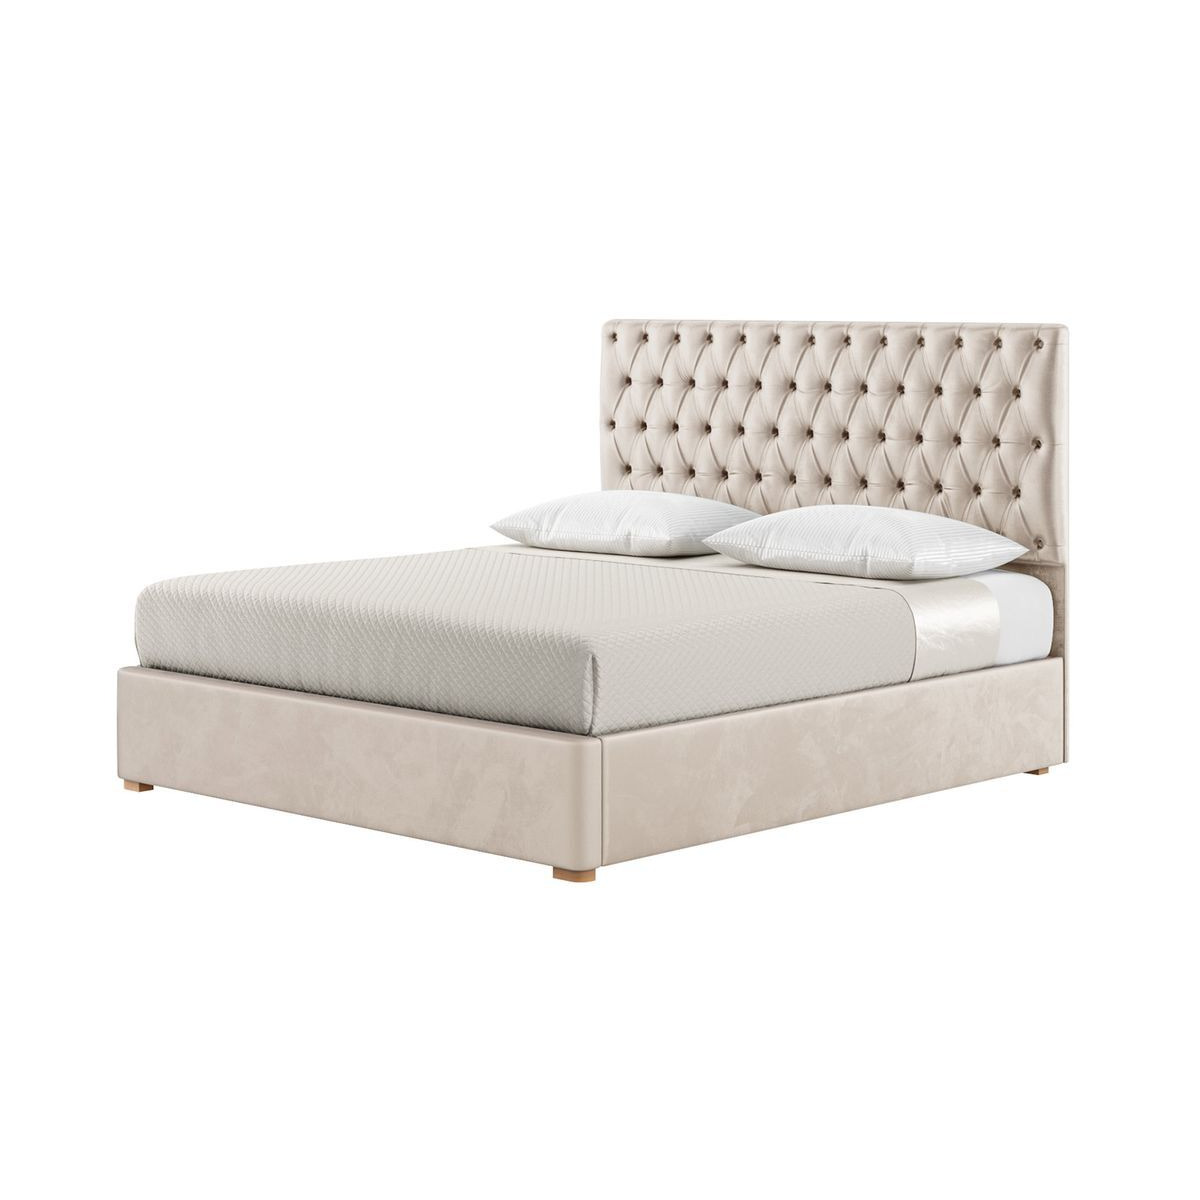 Jewel 6ft Super King Size Bed With Luxury Deep Button Quilted Headboard, light beige, Leg colour: like oak - image 1